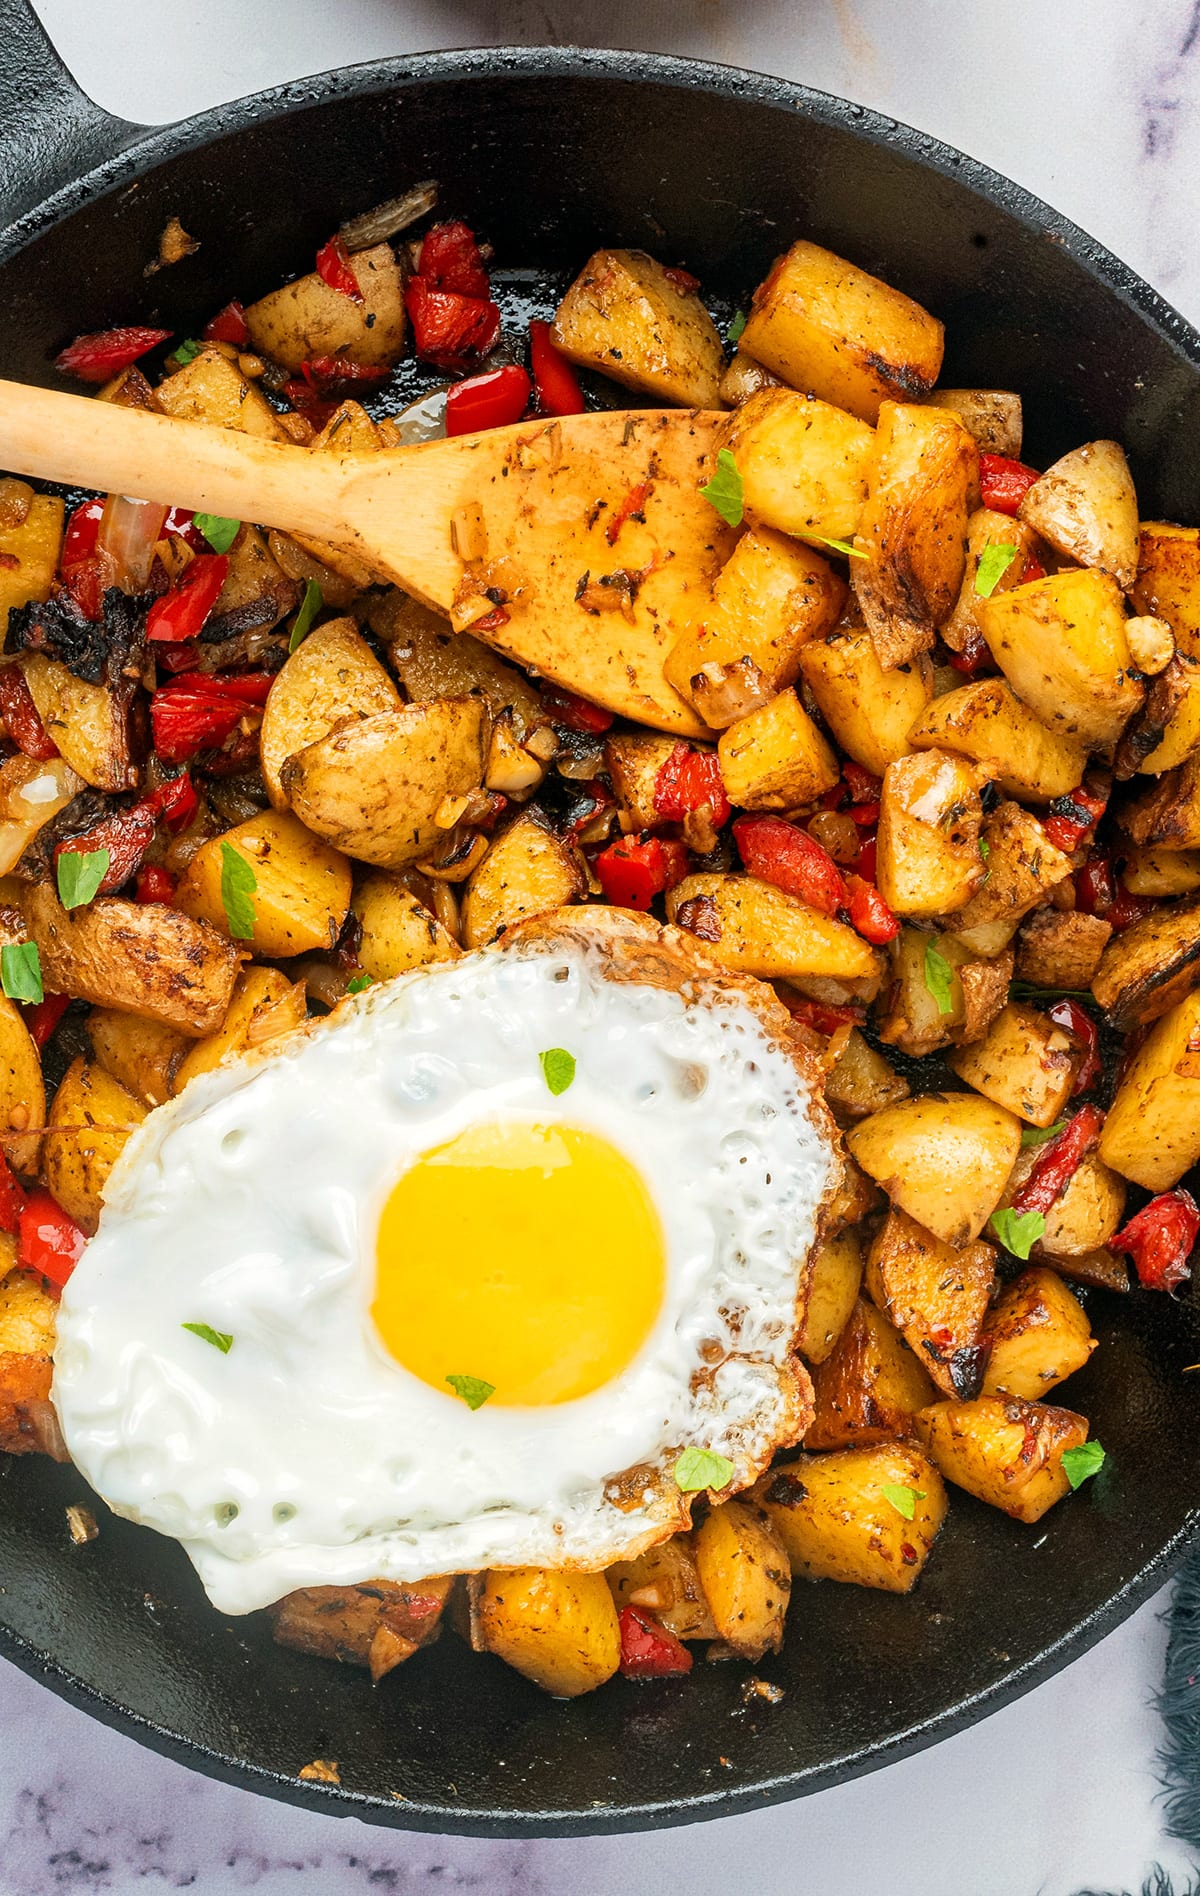 Breakfast potatoes fried in a skillet with a fried on top